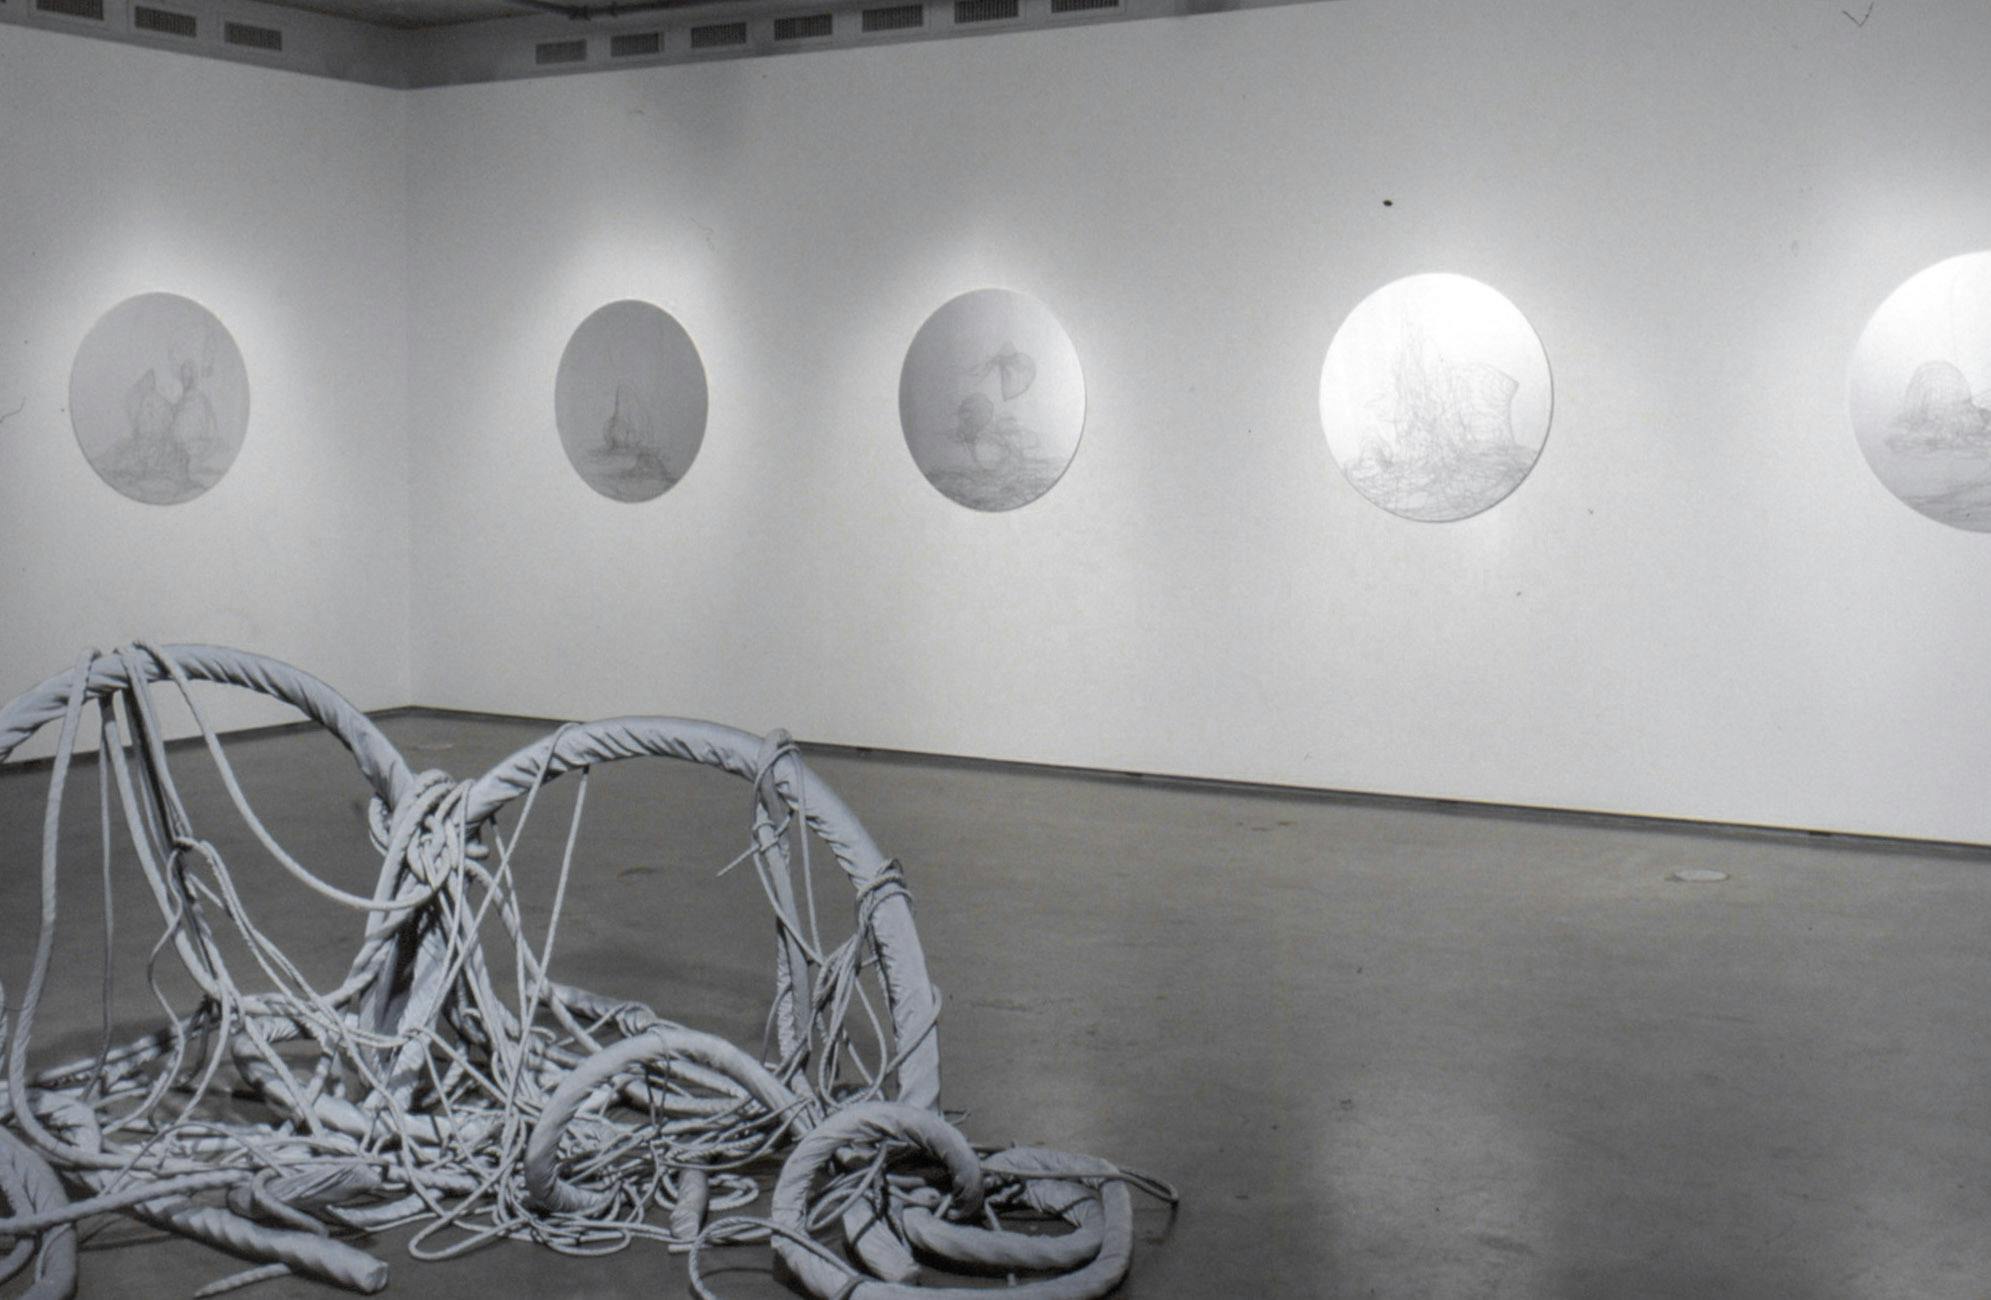 A large grey sculpture that looks like a tangled fishing net is placed in the middle of the gallery floor. Five circular shaped sculptures that resemble white marble are mounted on the walls. 